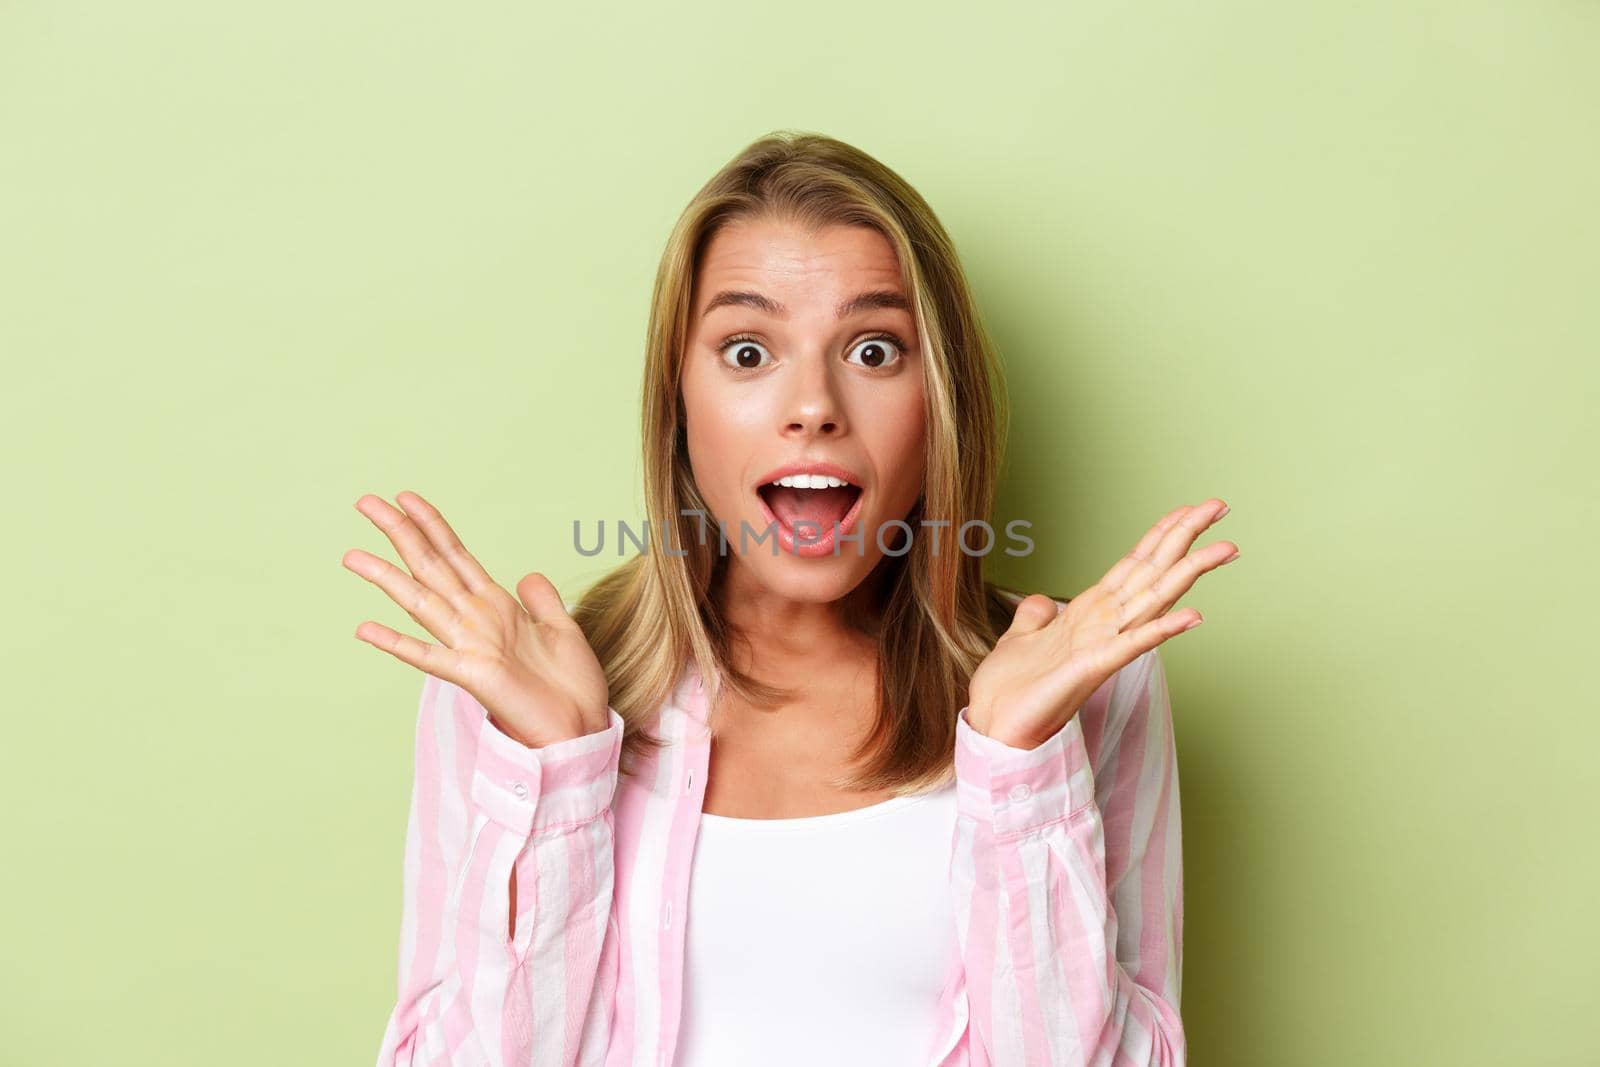 Close-up of attractive blond woman looking surprised, spread hands sideways and open mouth impressed, standing over green background.